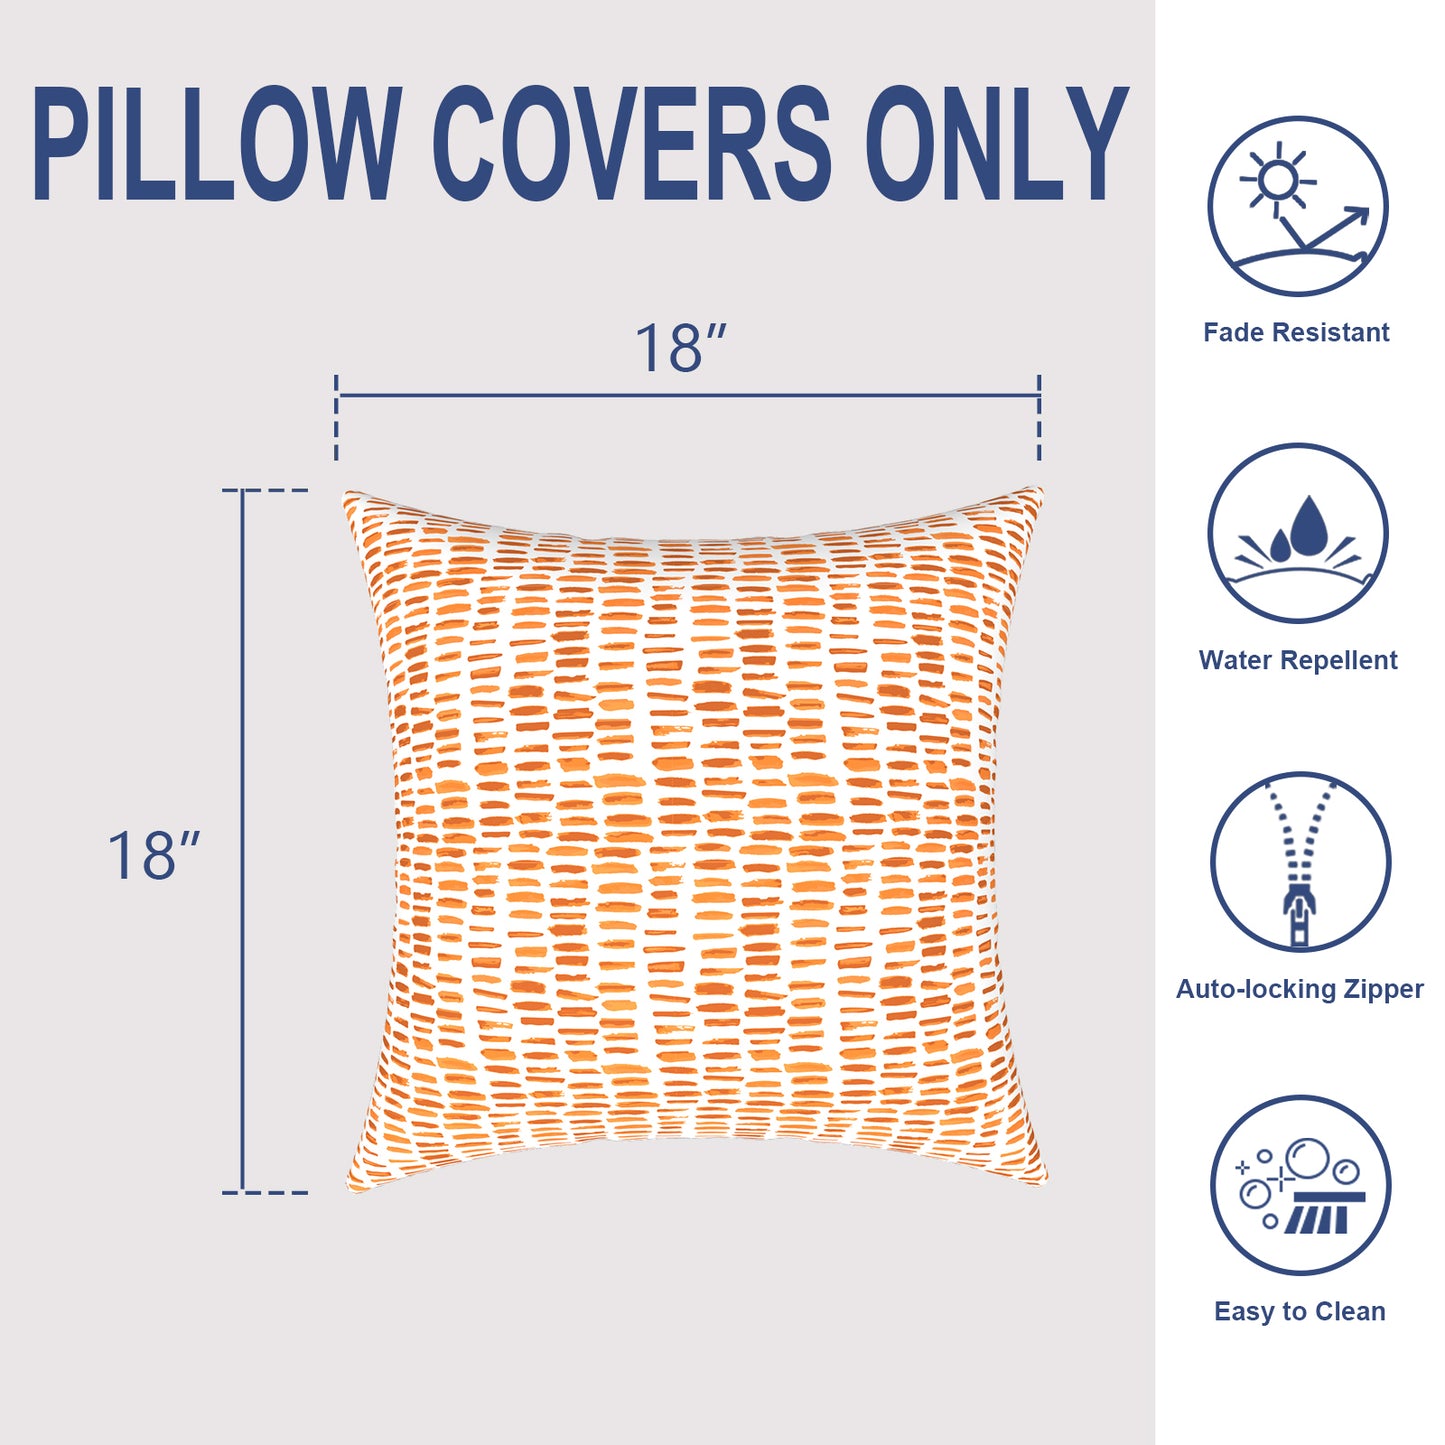 Melody Elephant Outdoor Throw Pillow Covers Pack of 2, Decorative Water Repellent Square Pillow Cases 18x18 Inch, Patio Pillowcases for Home Patio Furniture Use, Pebble Orange